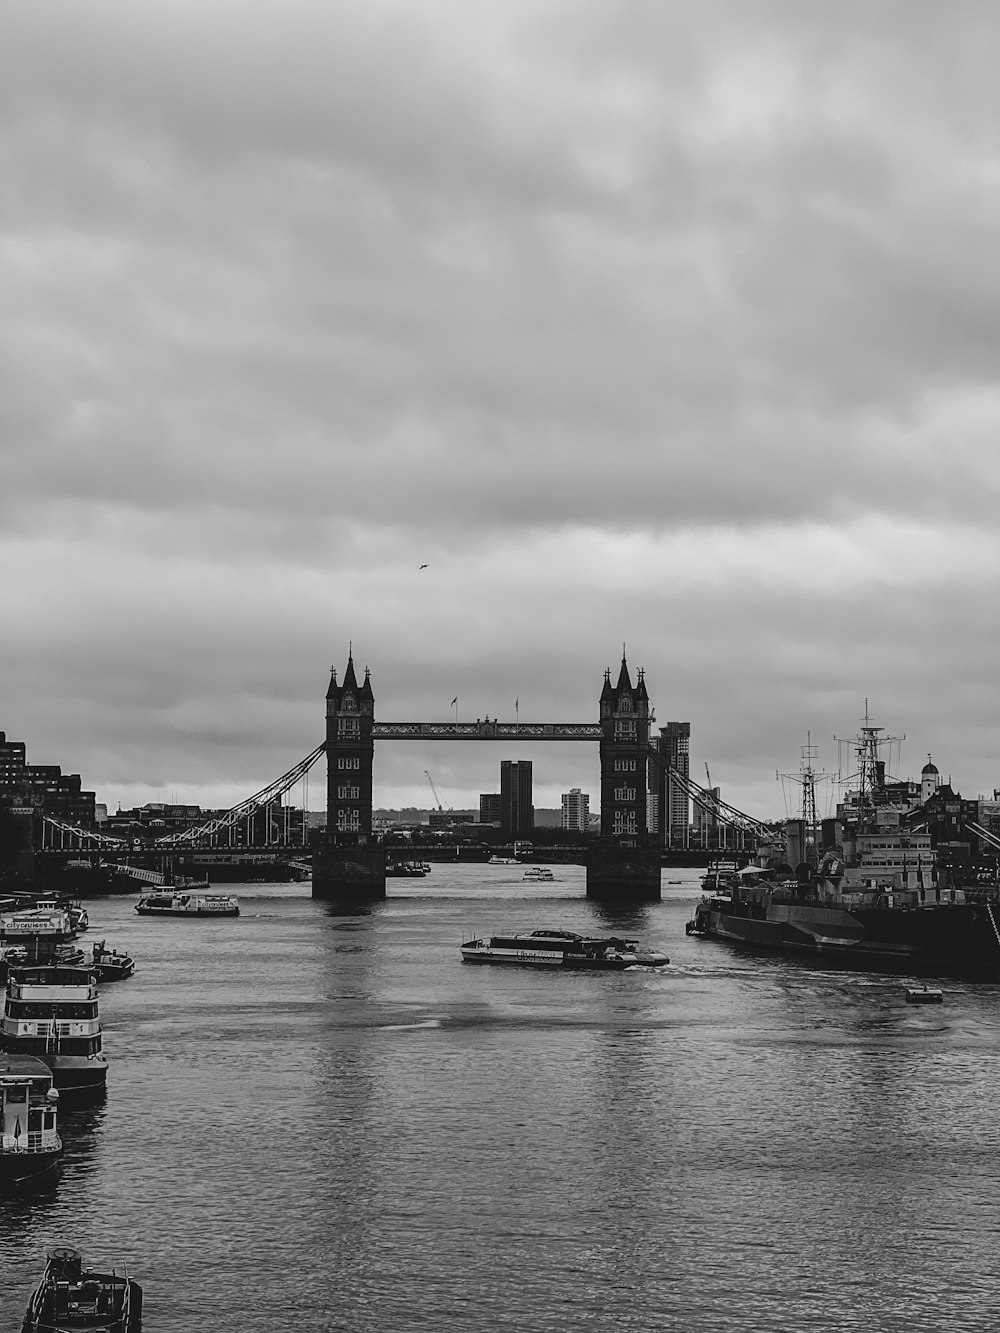 a black and white photo of a bridge and boats